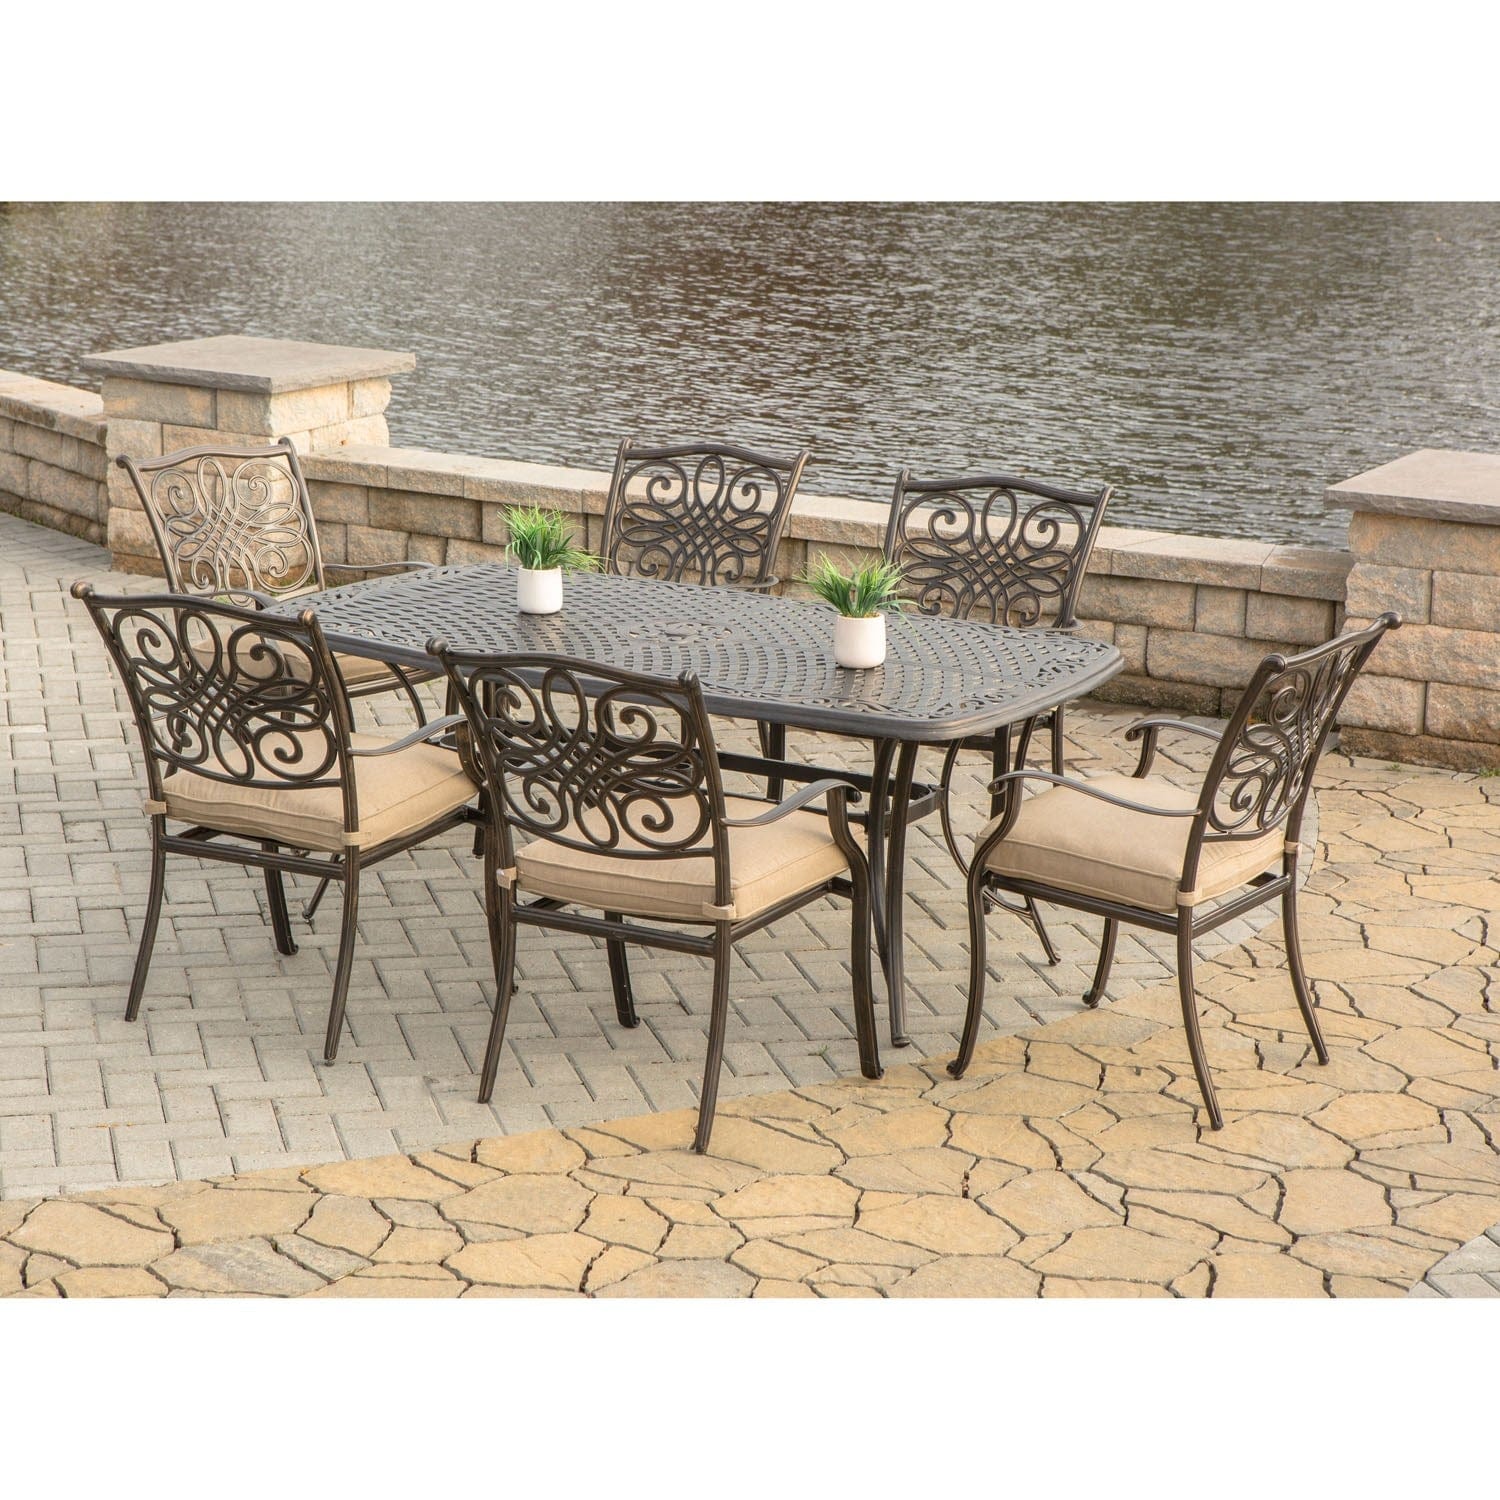 Hanover Outdoor Dining Set Hanover - Traditions 7-Piece Outdoor Dining Set | 72 x 38" Cast Top Table | 6 Dining Chairs | Tan | TRADITIONS7PC